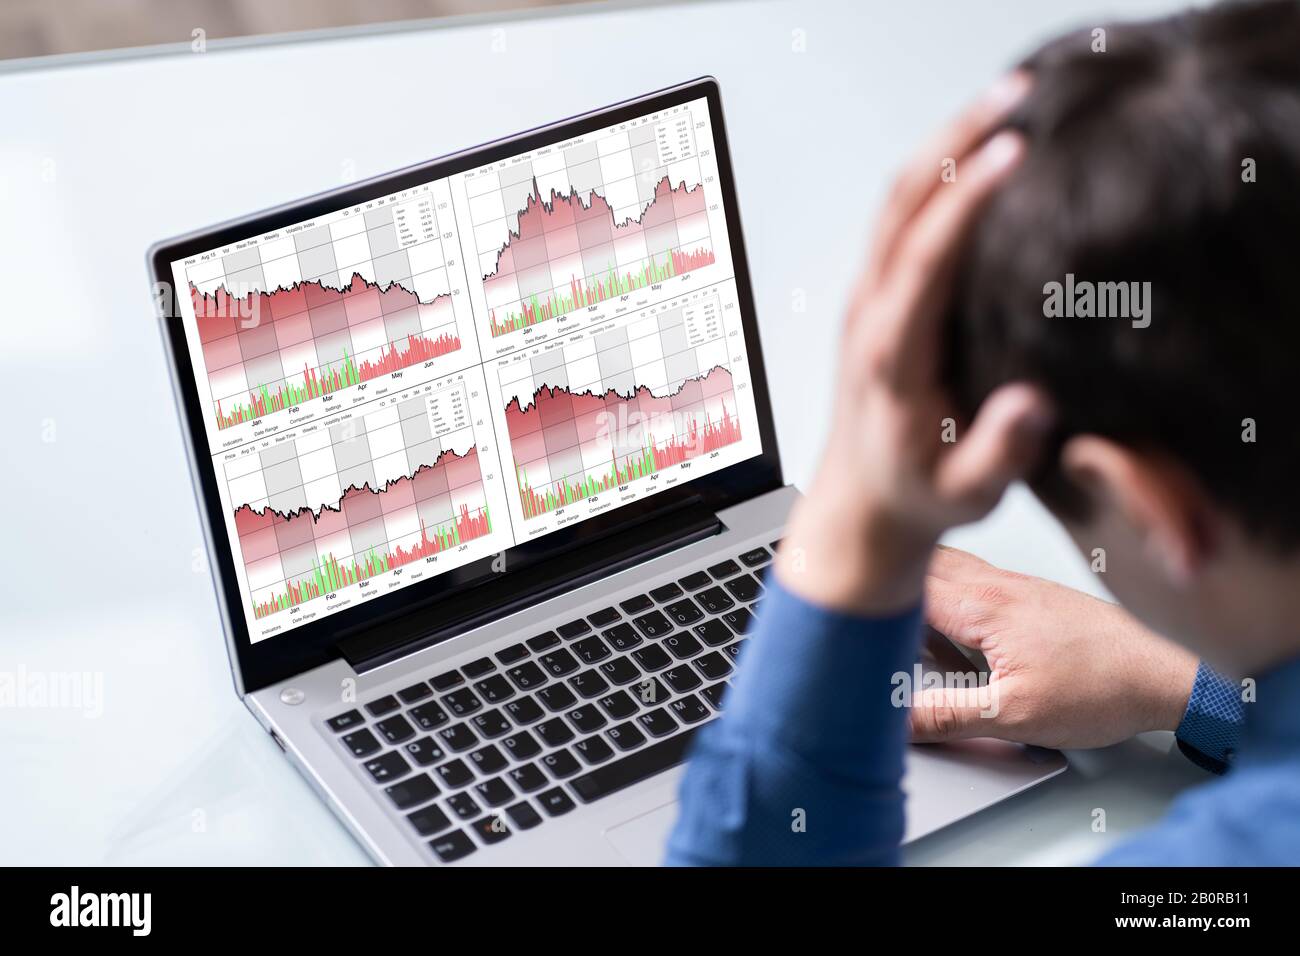 Despairing Businessman Faced With Stock Market Financial Losses Stock Photo